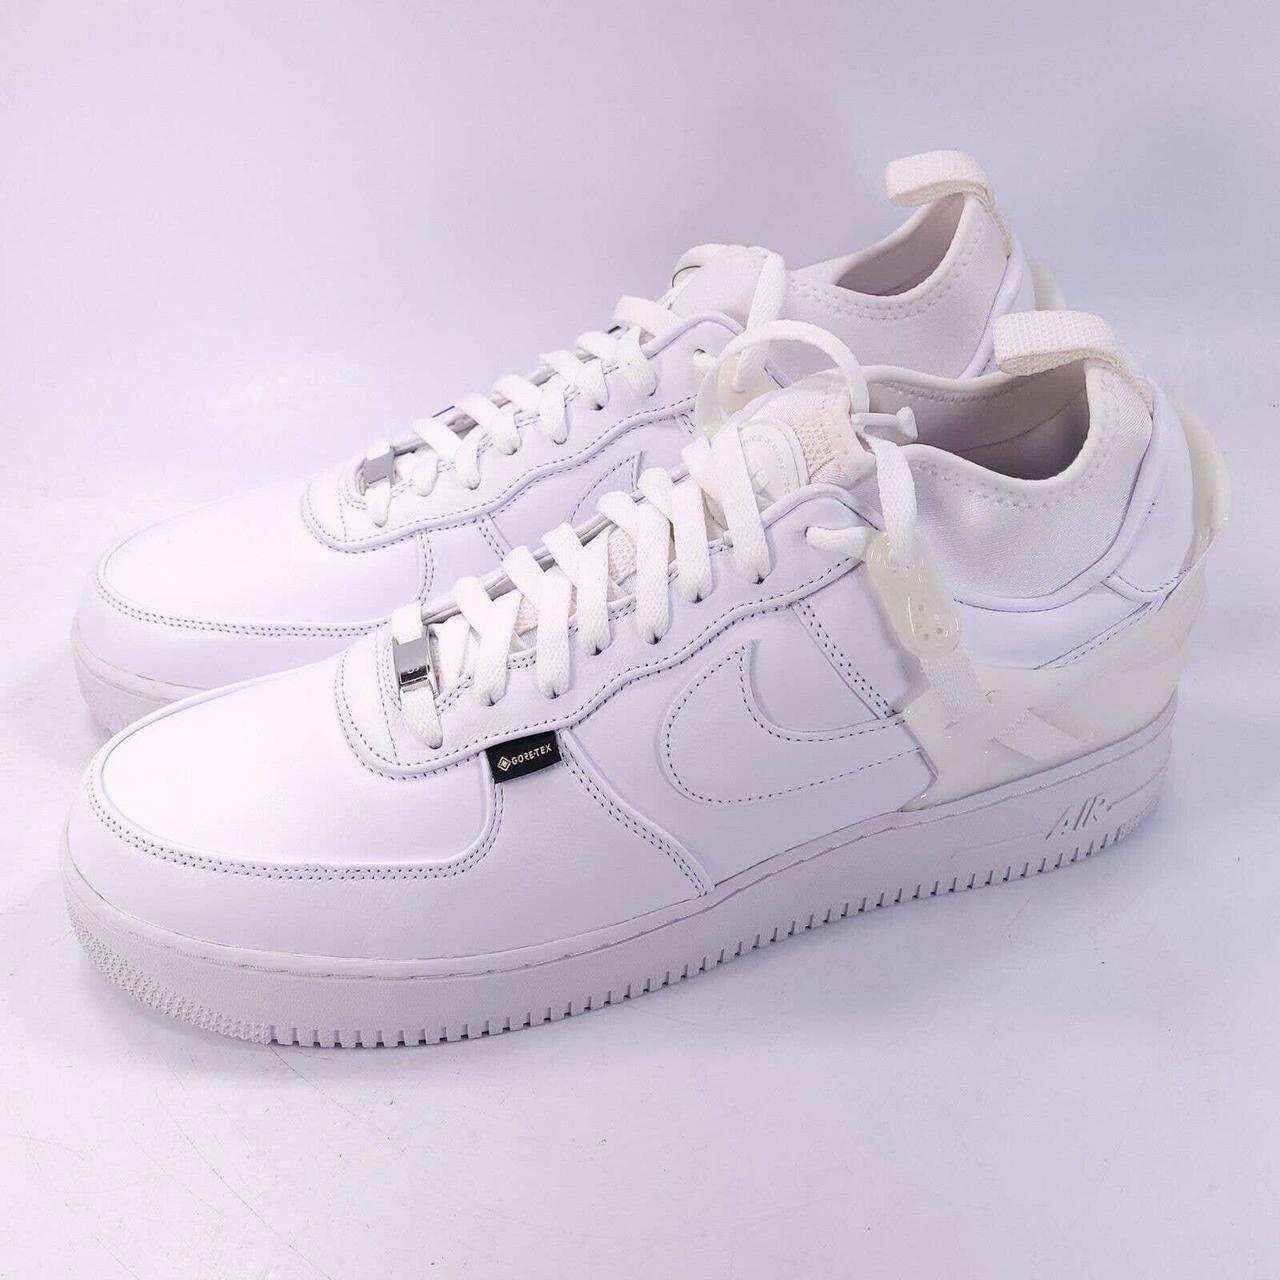 NIKE AIR FORCE 1 '07 LV8 2 TRAINERS SHOES UK 6 EUR - Depop